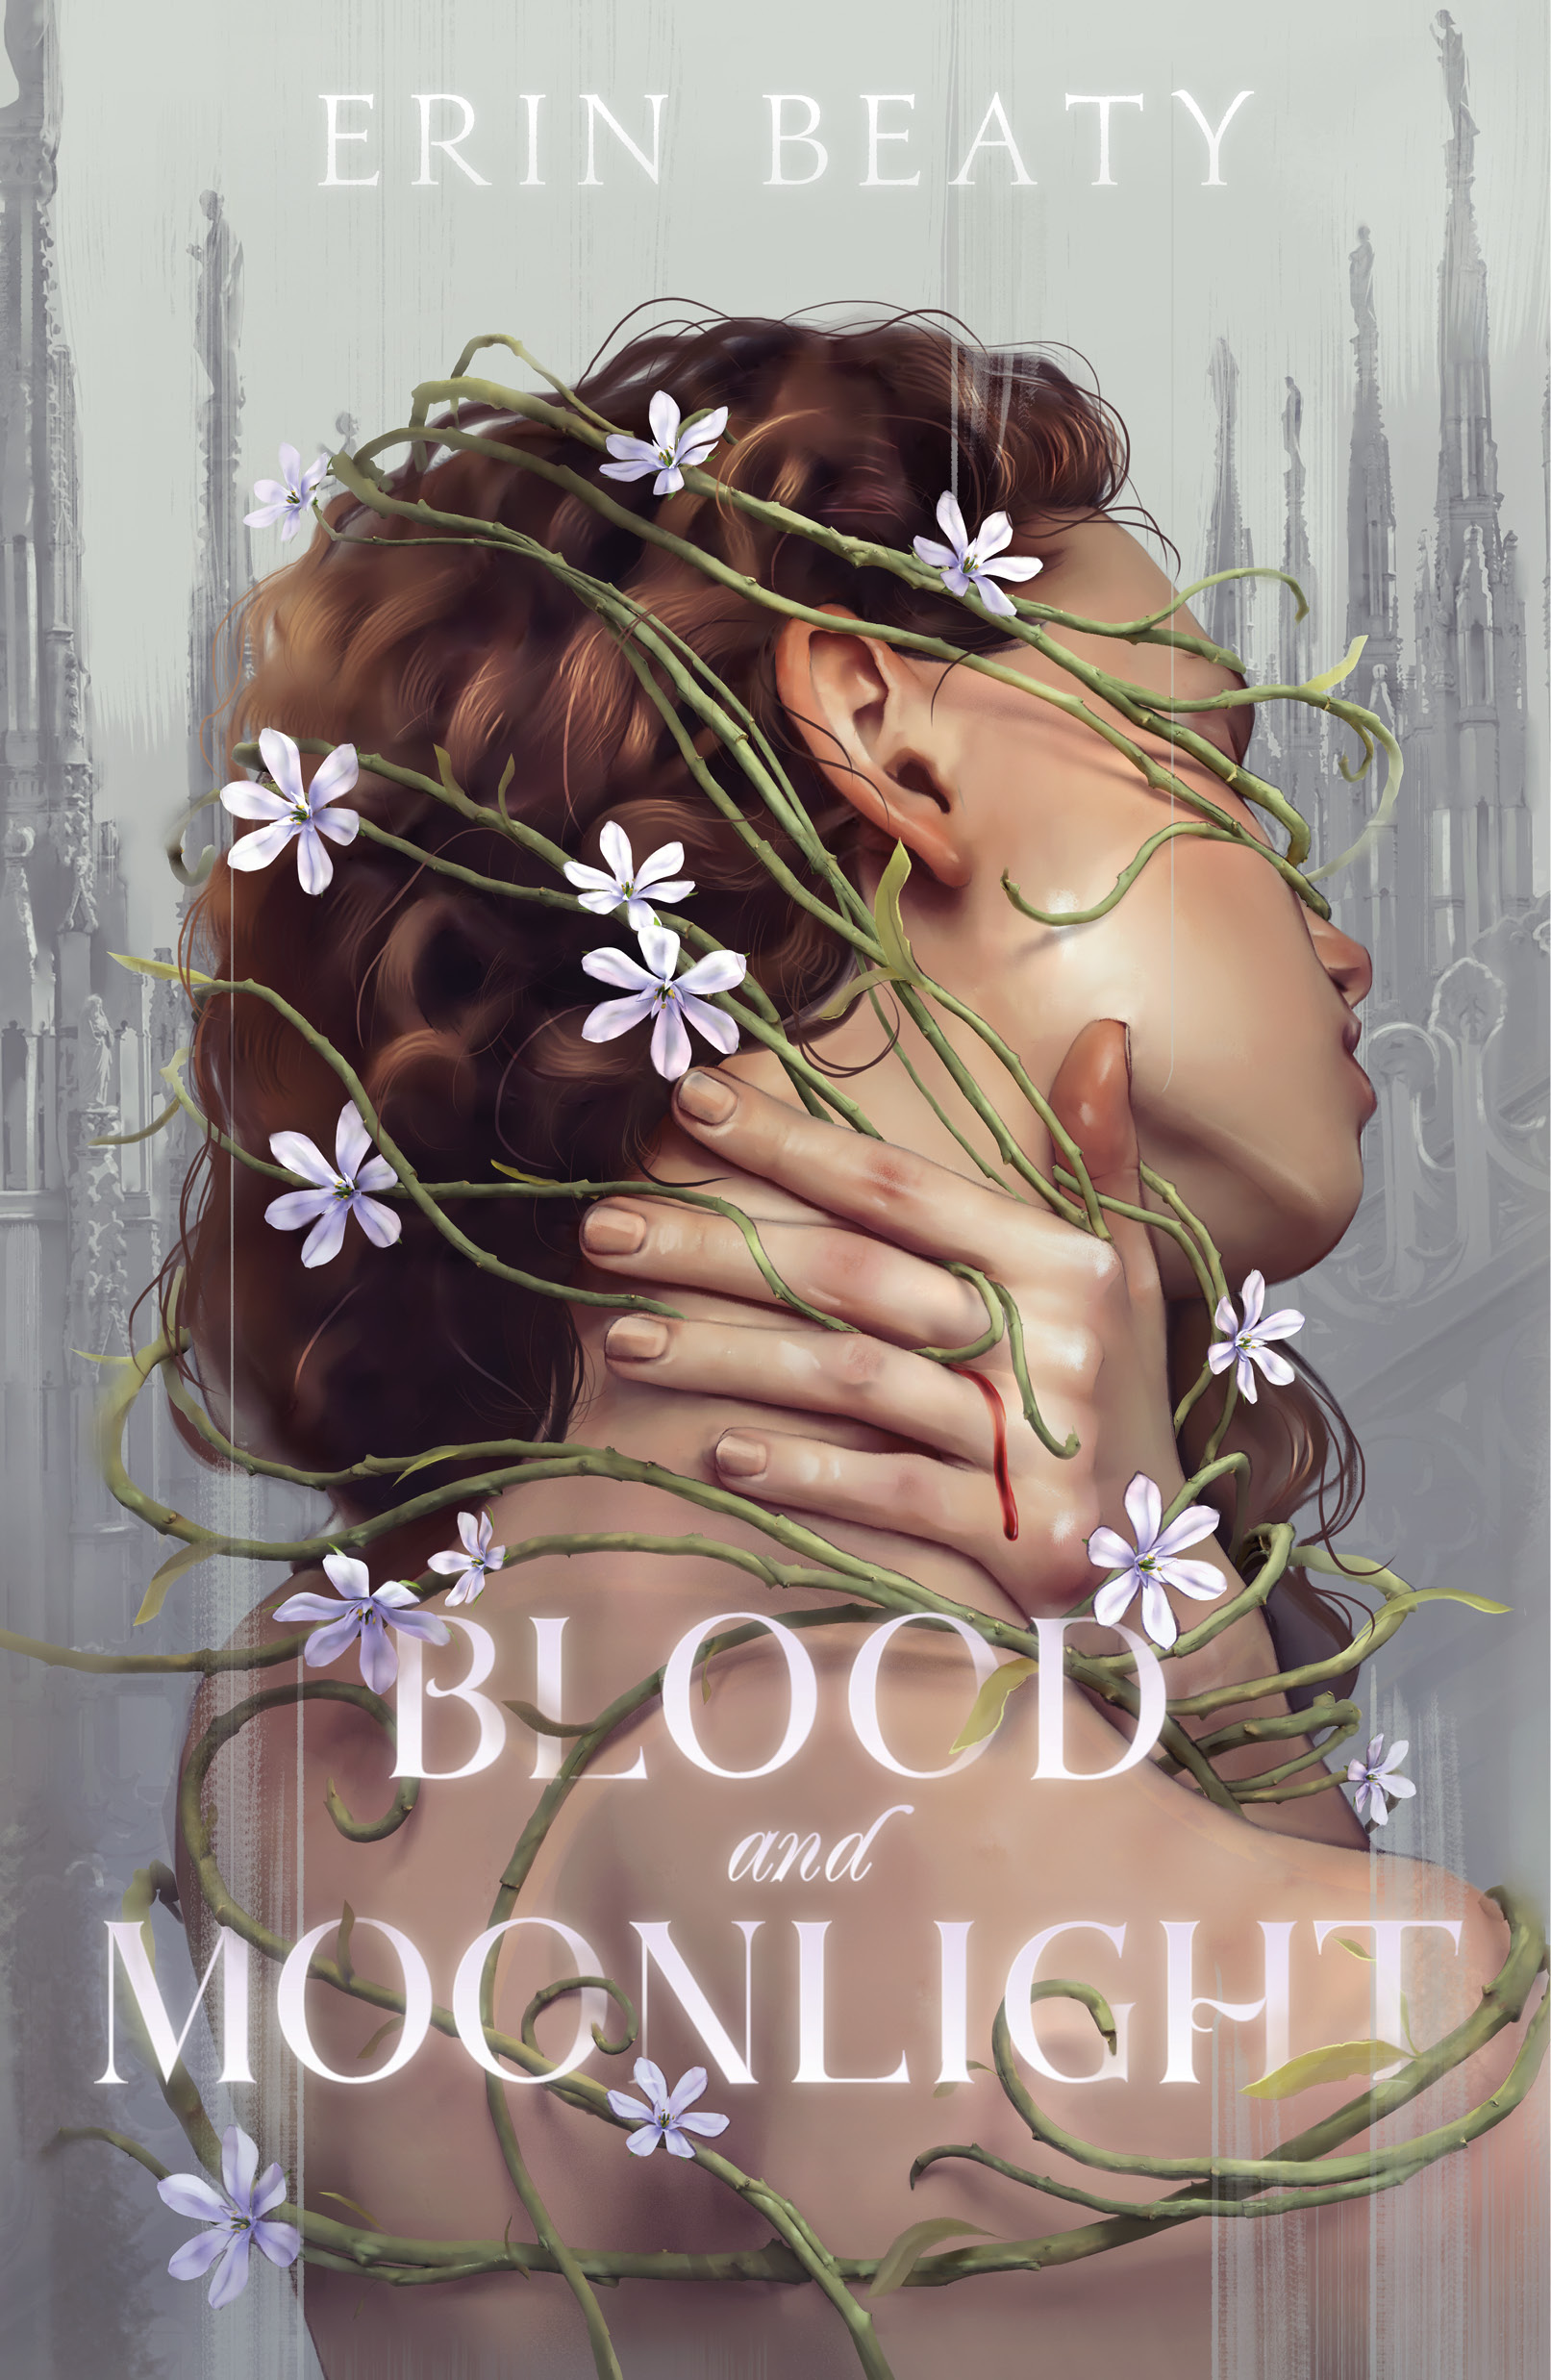 Book Blood and Moonlight